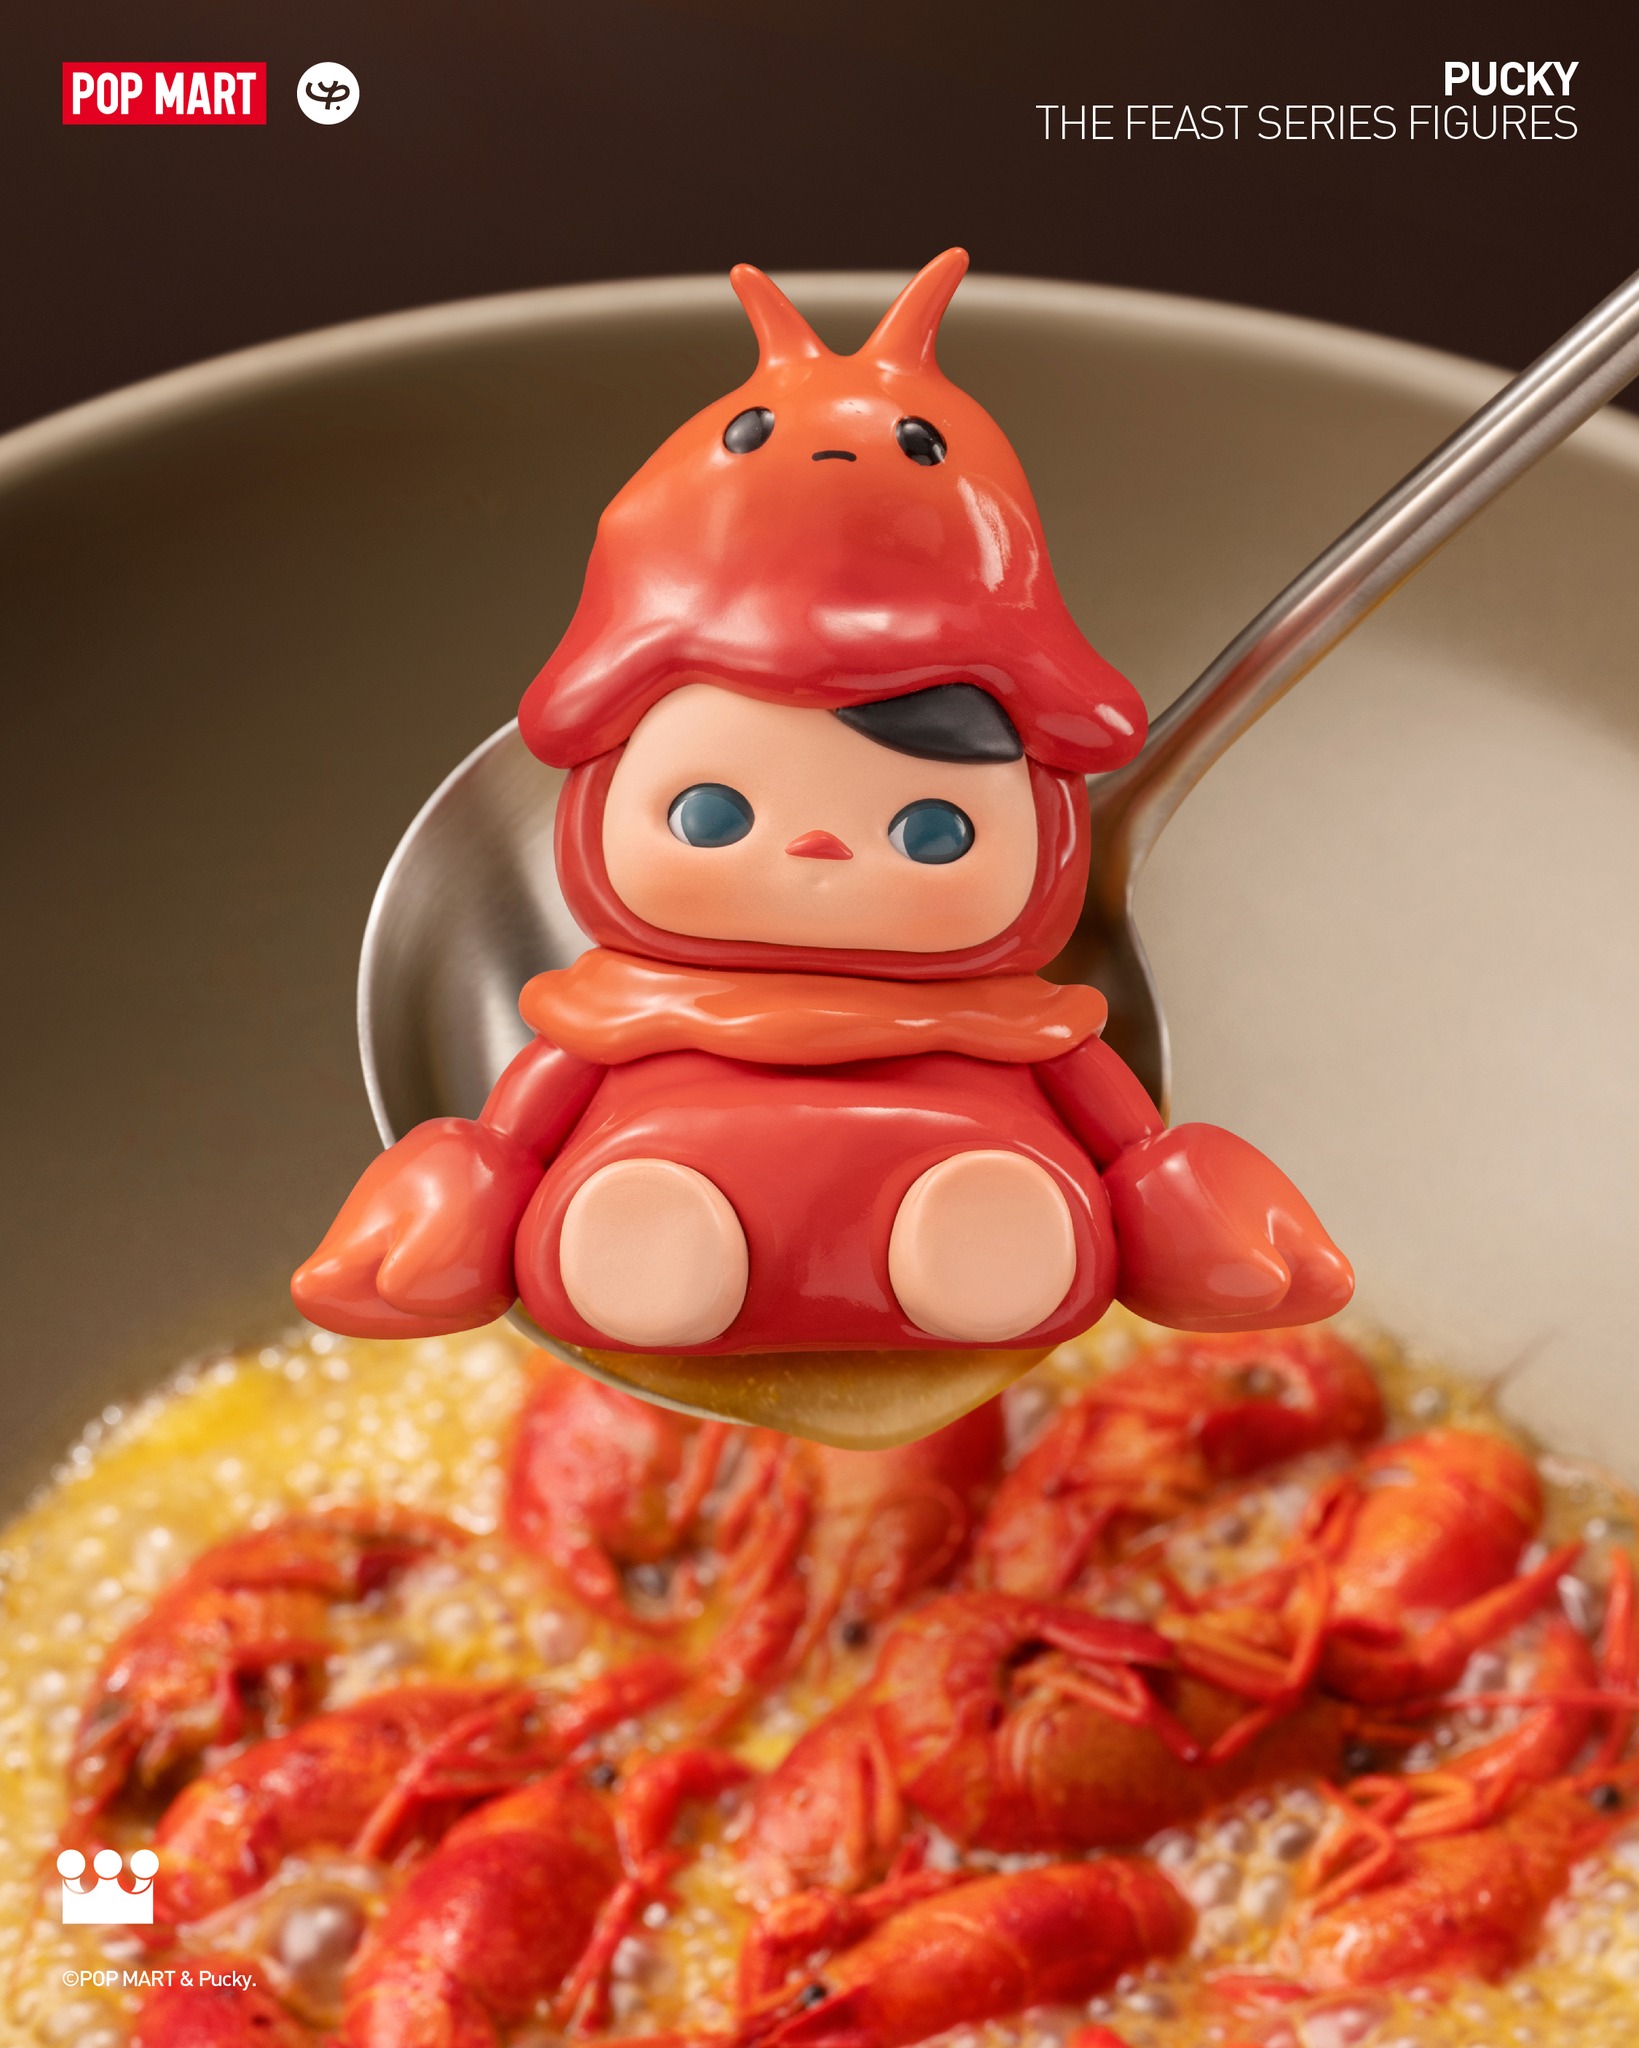 POP MART Presents Pucky The Feast Blind Box Series - The Toy Chronicle